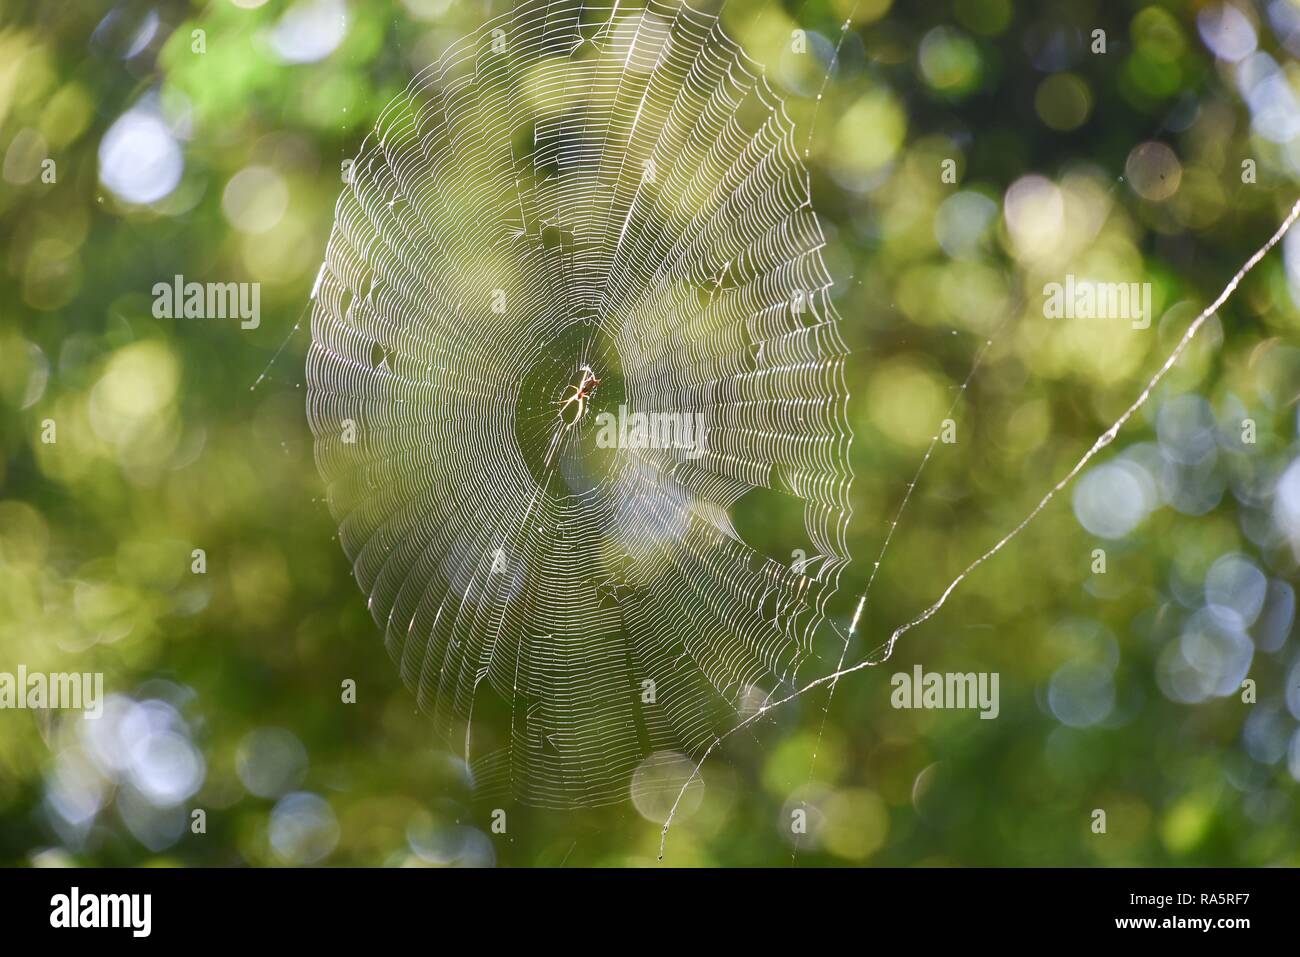 Spider web with spider in backlight in front of green leaves, Brazil Stock Photo